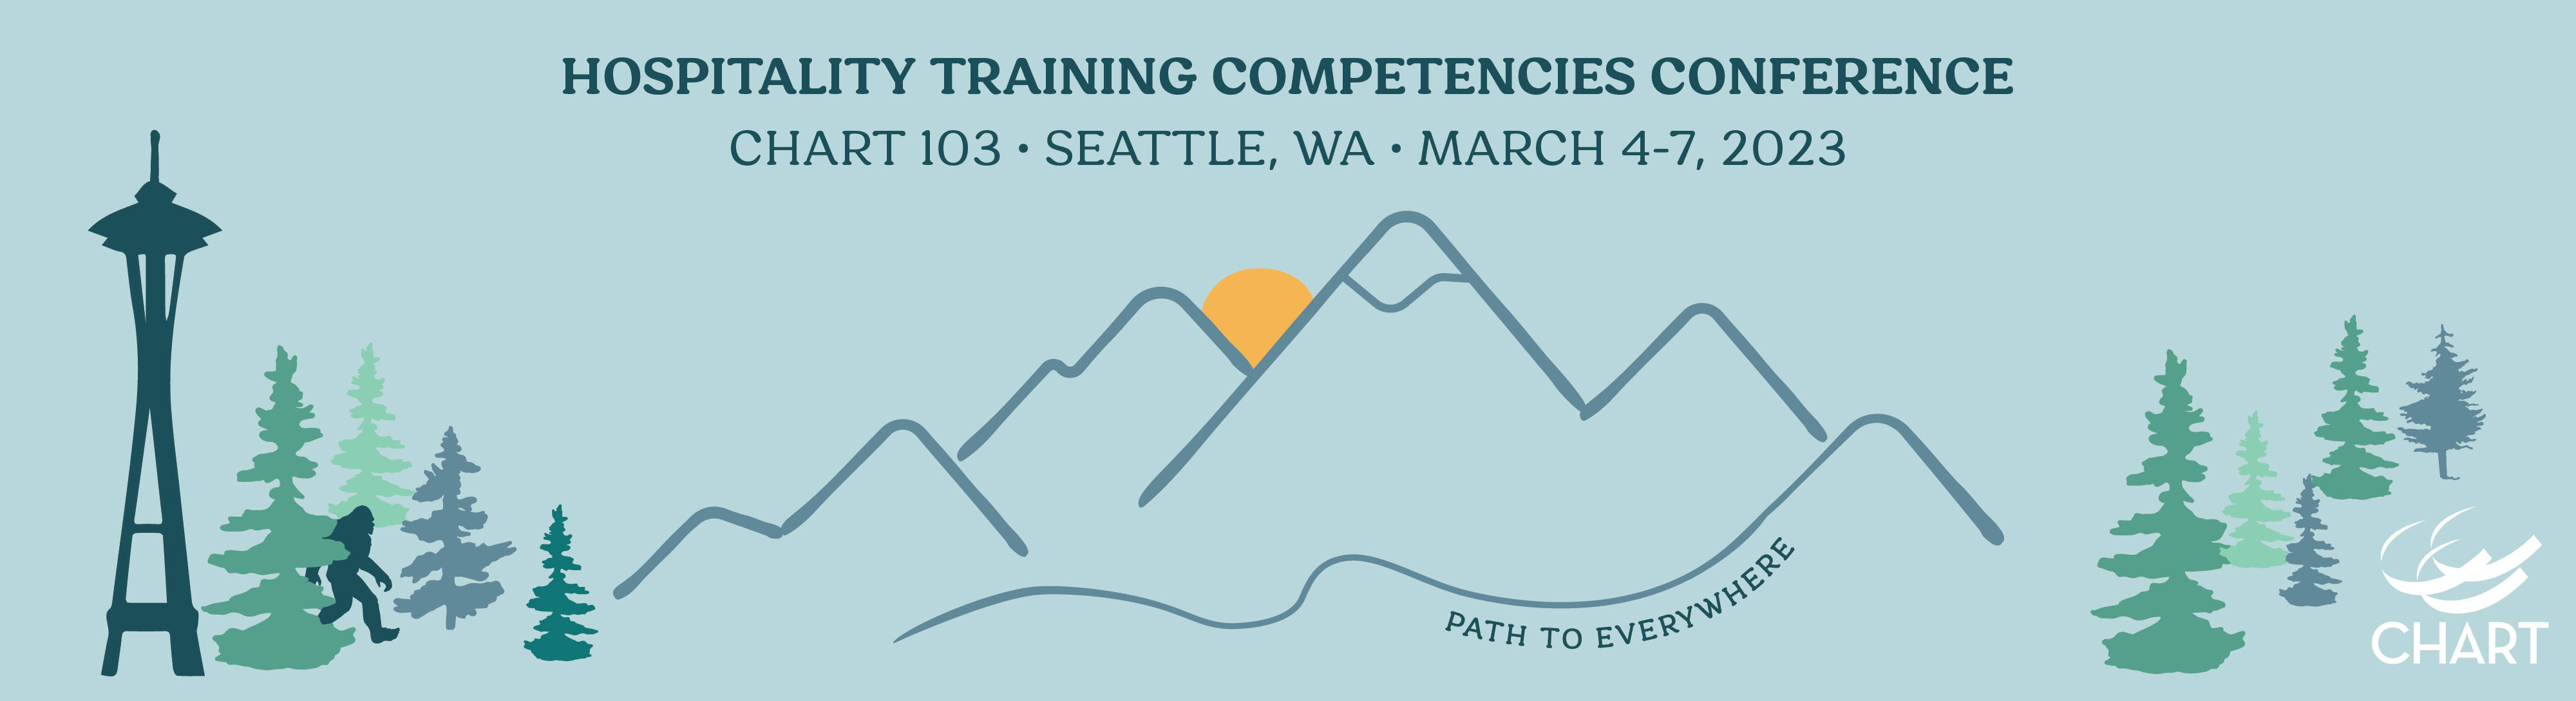 Hospitality Training Competencies Conference - CHART 103 Seattle